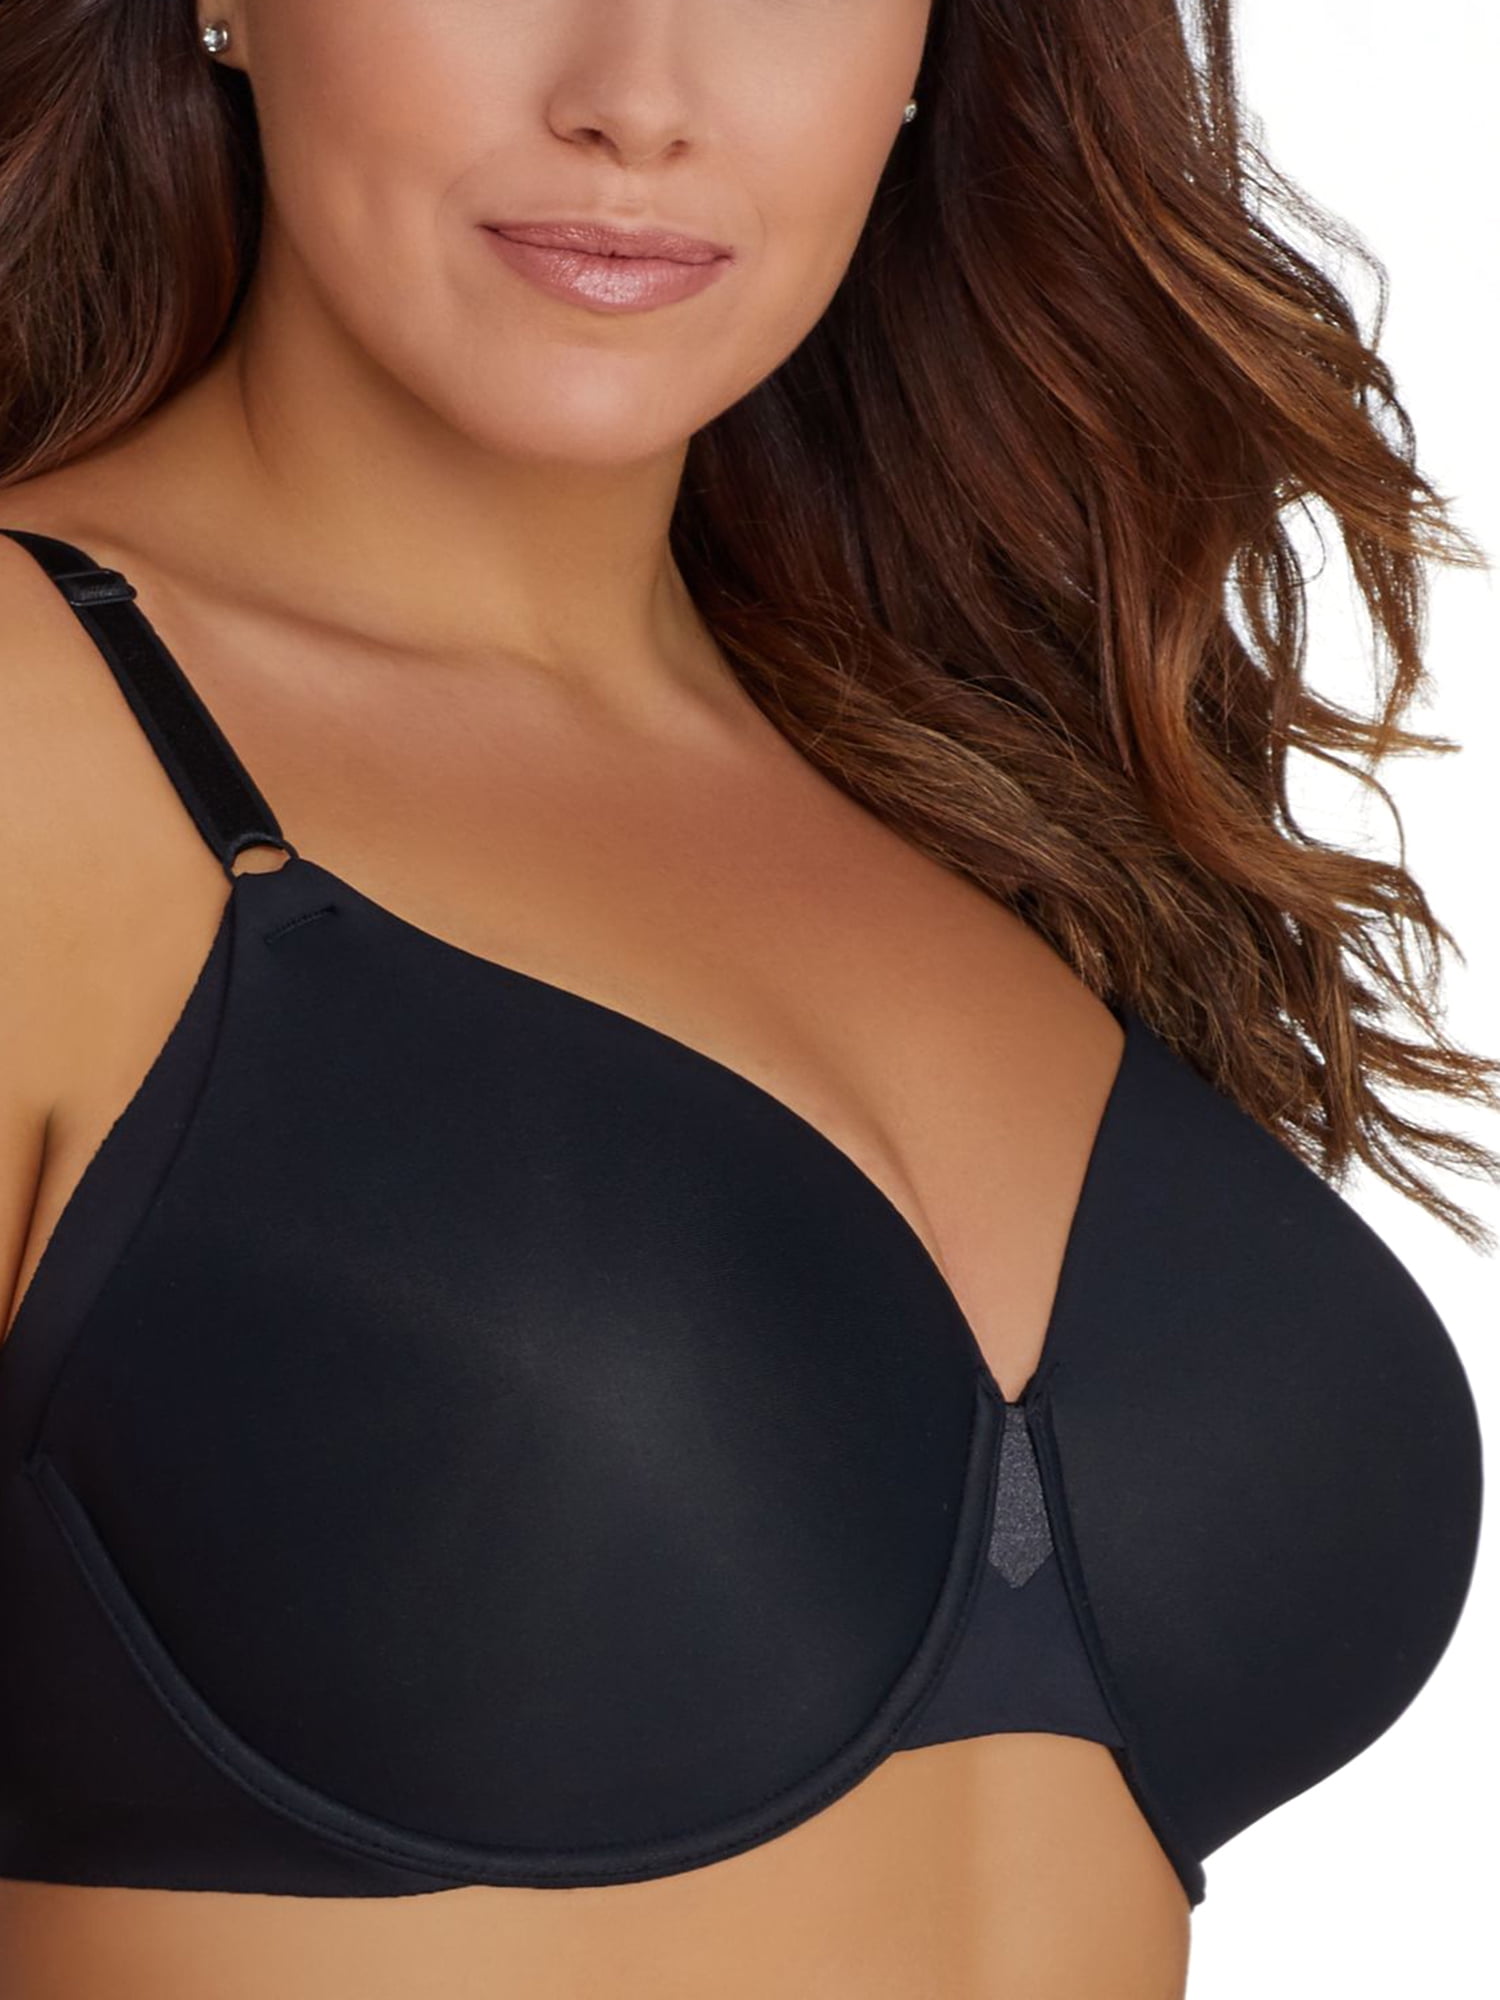 Olga No Side Effects Underwire Bra Style GI3561A Size 44 D Retail for sale  online